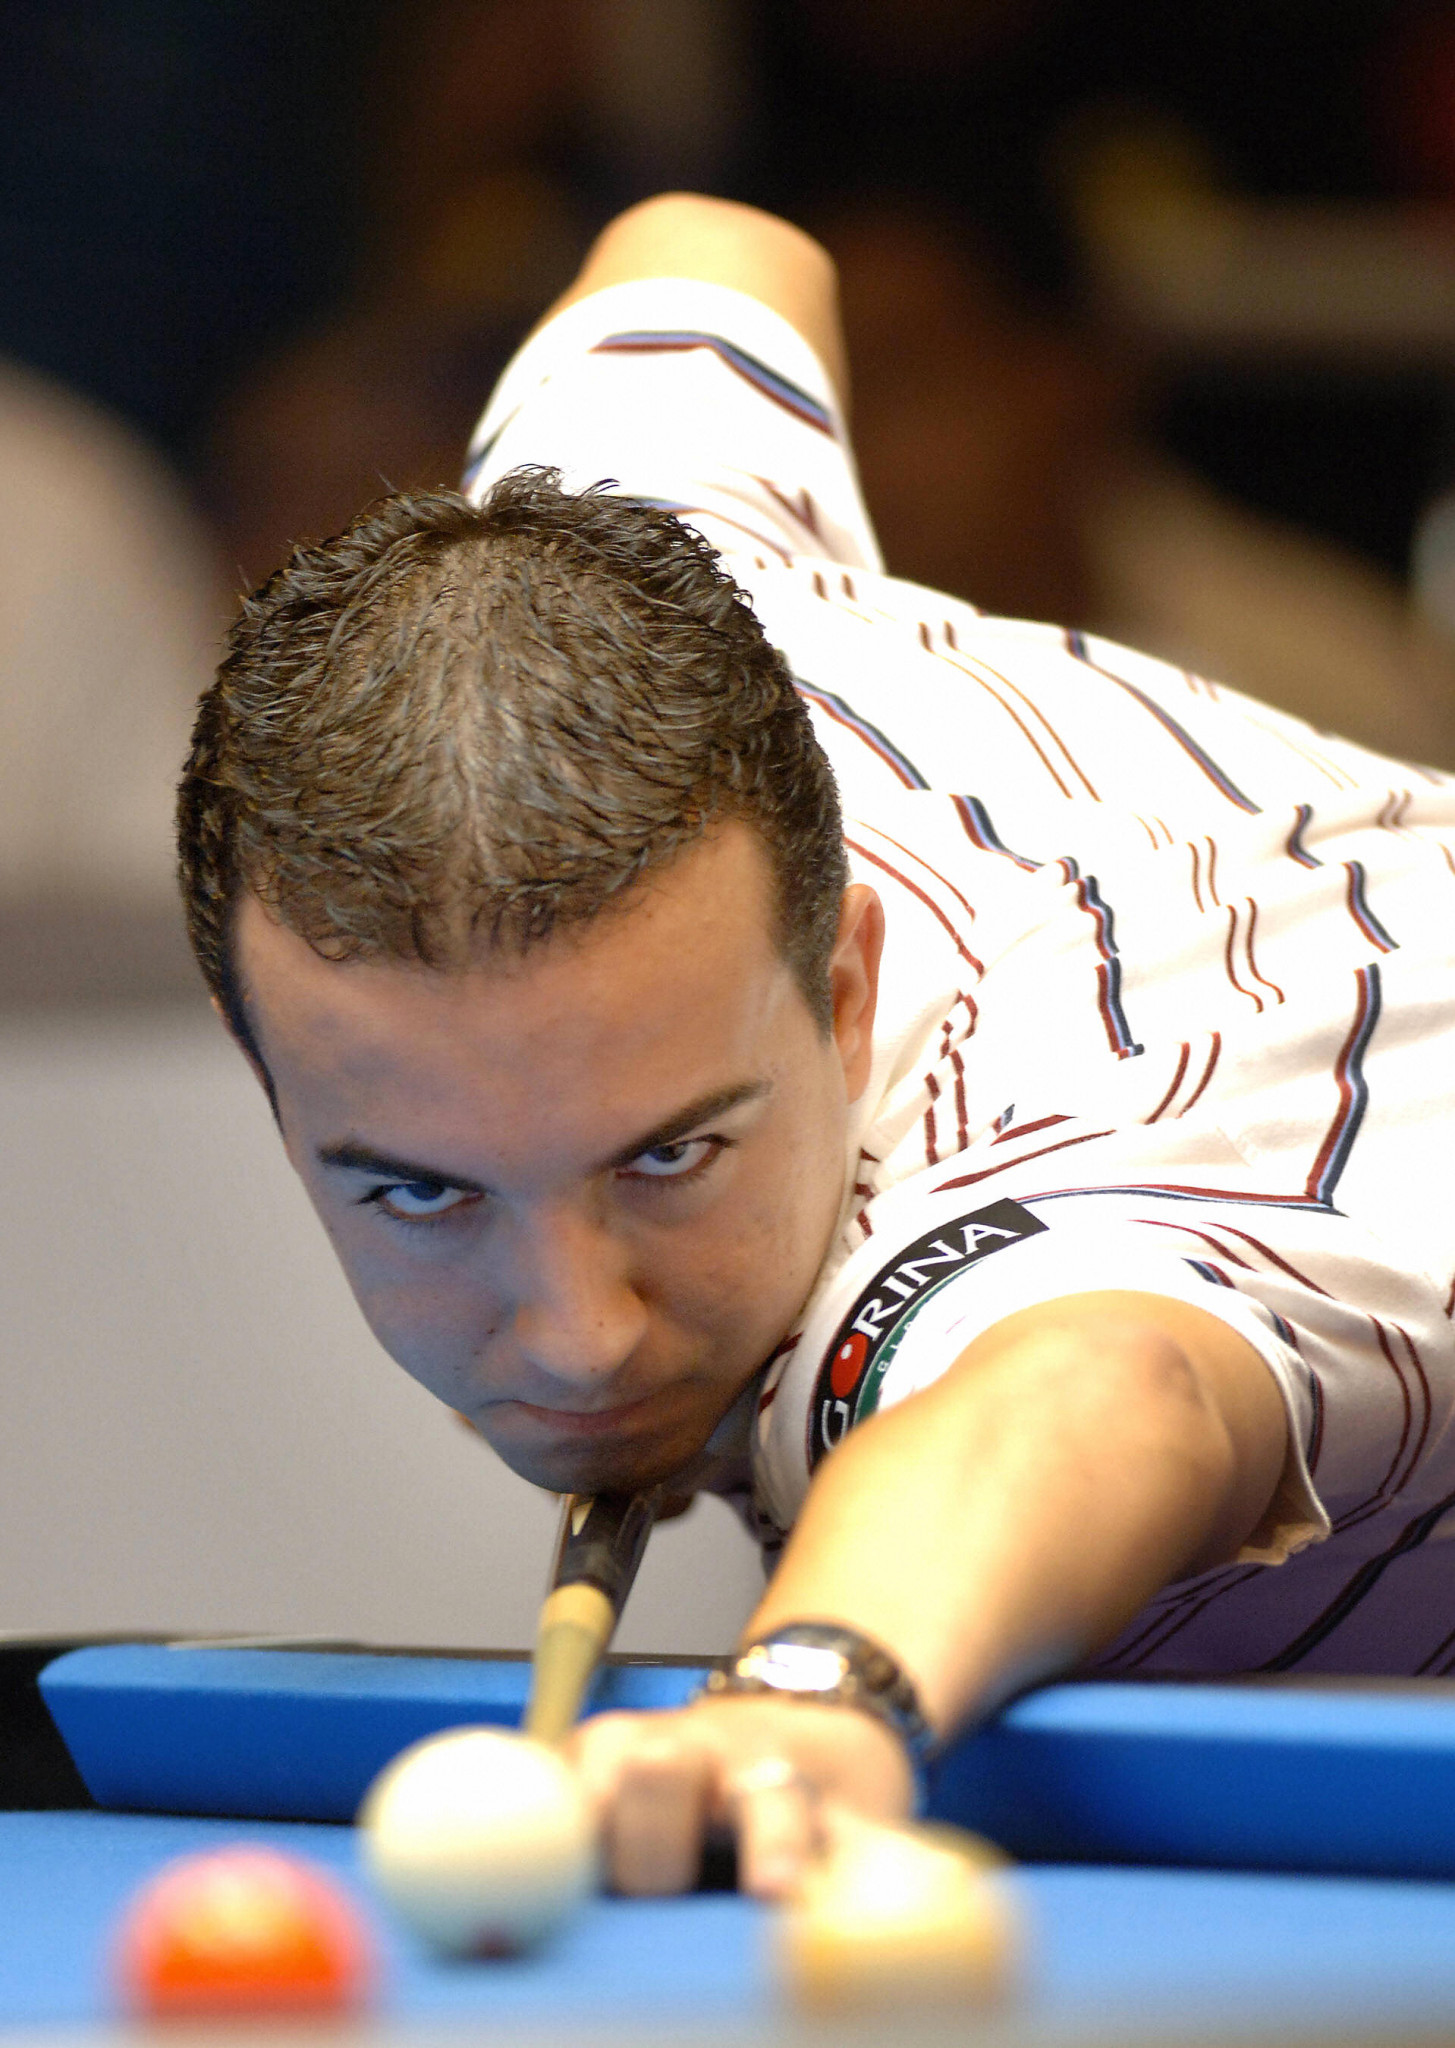 Defending champion Alcaide knocked out at World Pool Masters